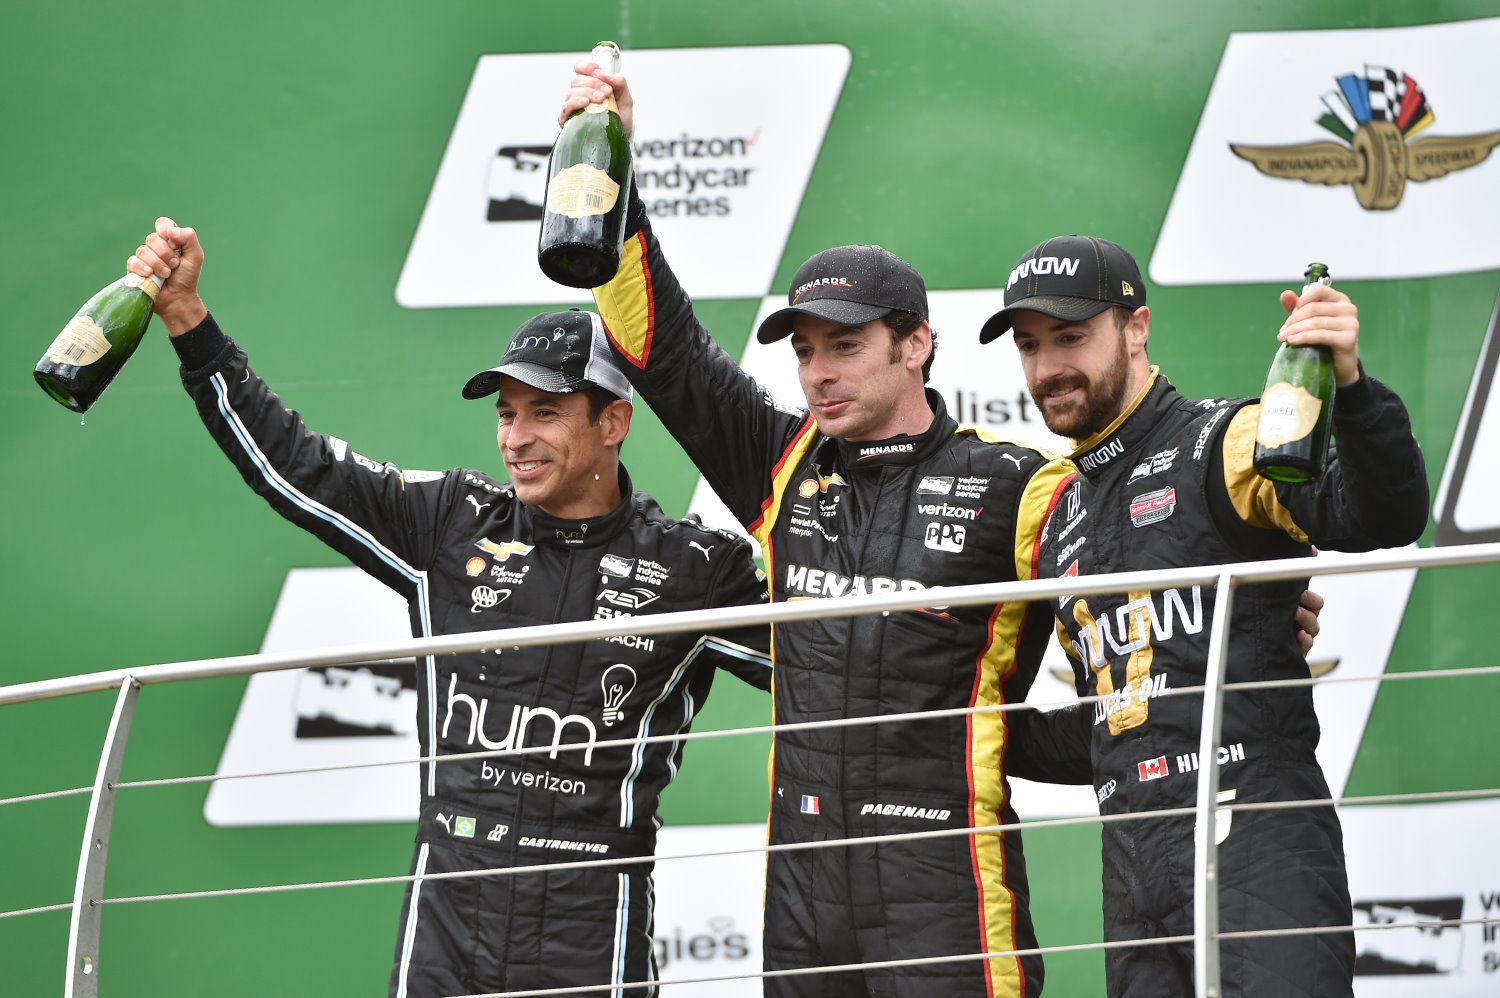 From left, Castroneves, Pagenaud and Hinchcliffe